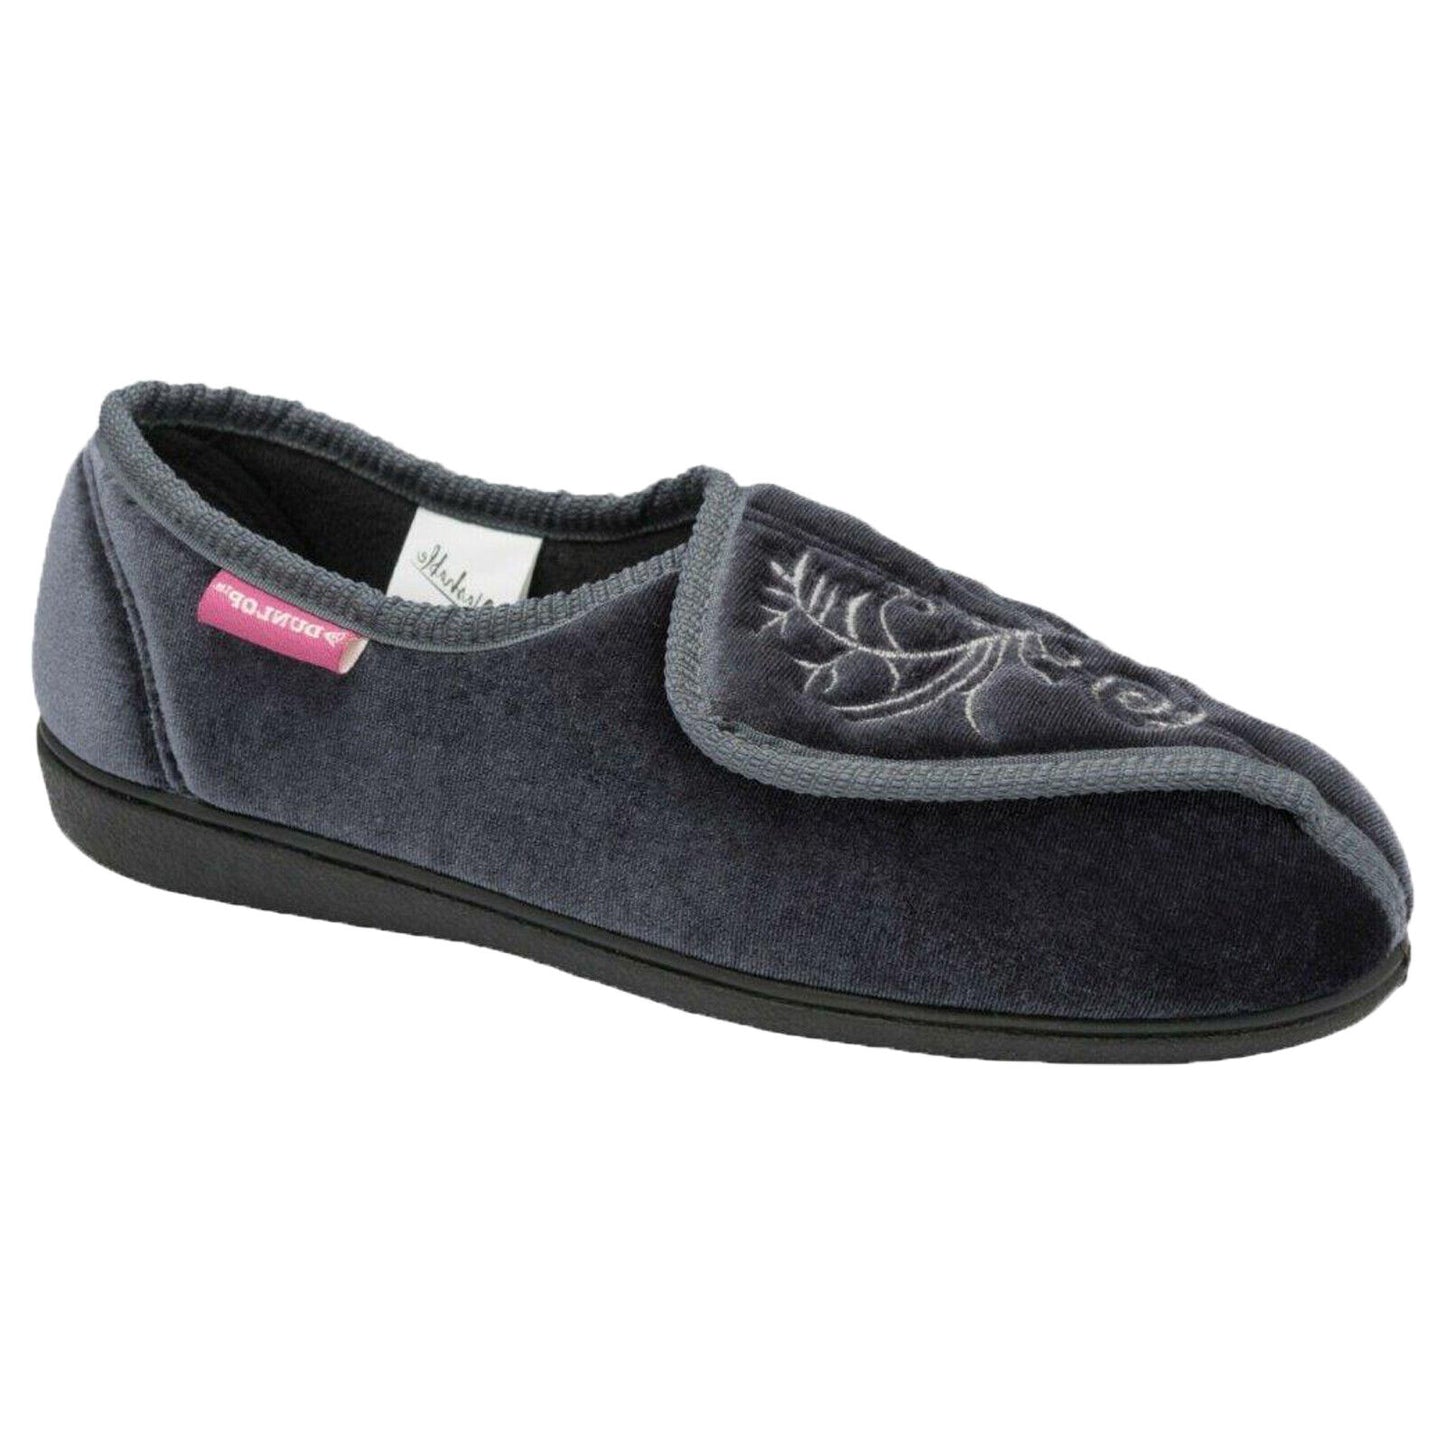 Ladies Dunlop Touch Fasten Memory Foam Orthopaedic Shoes Comfy Lounge Slippers